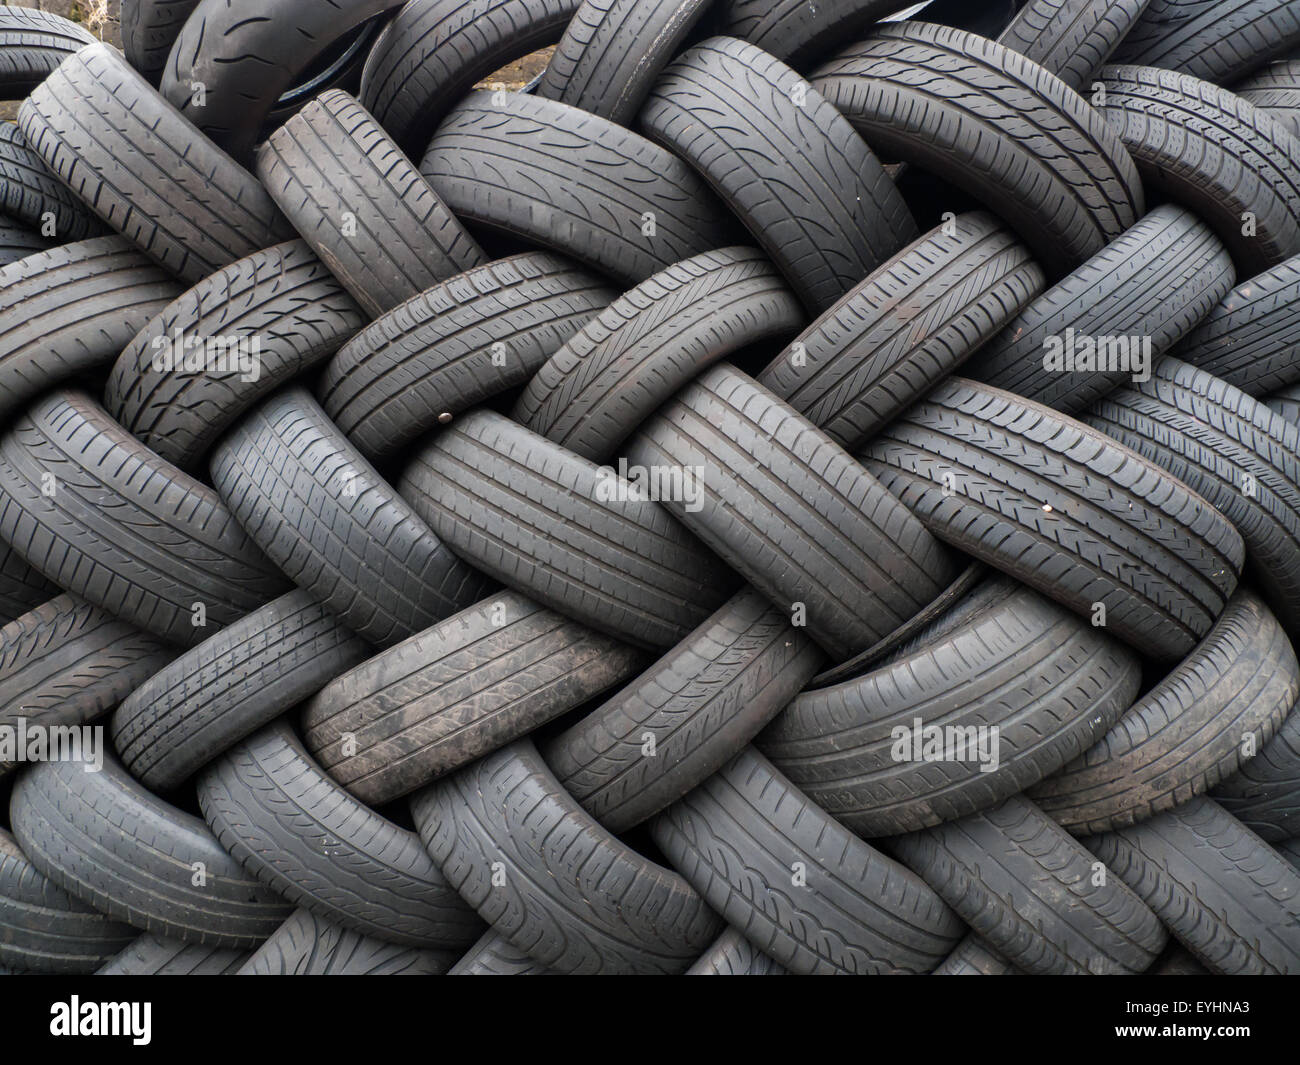 London, England. Tyres in a pattern, like woven. Stock Photo